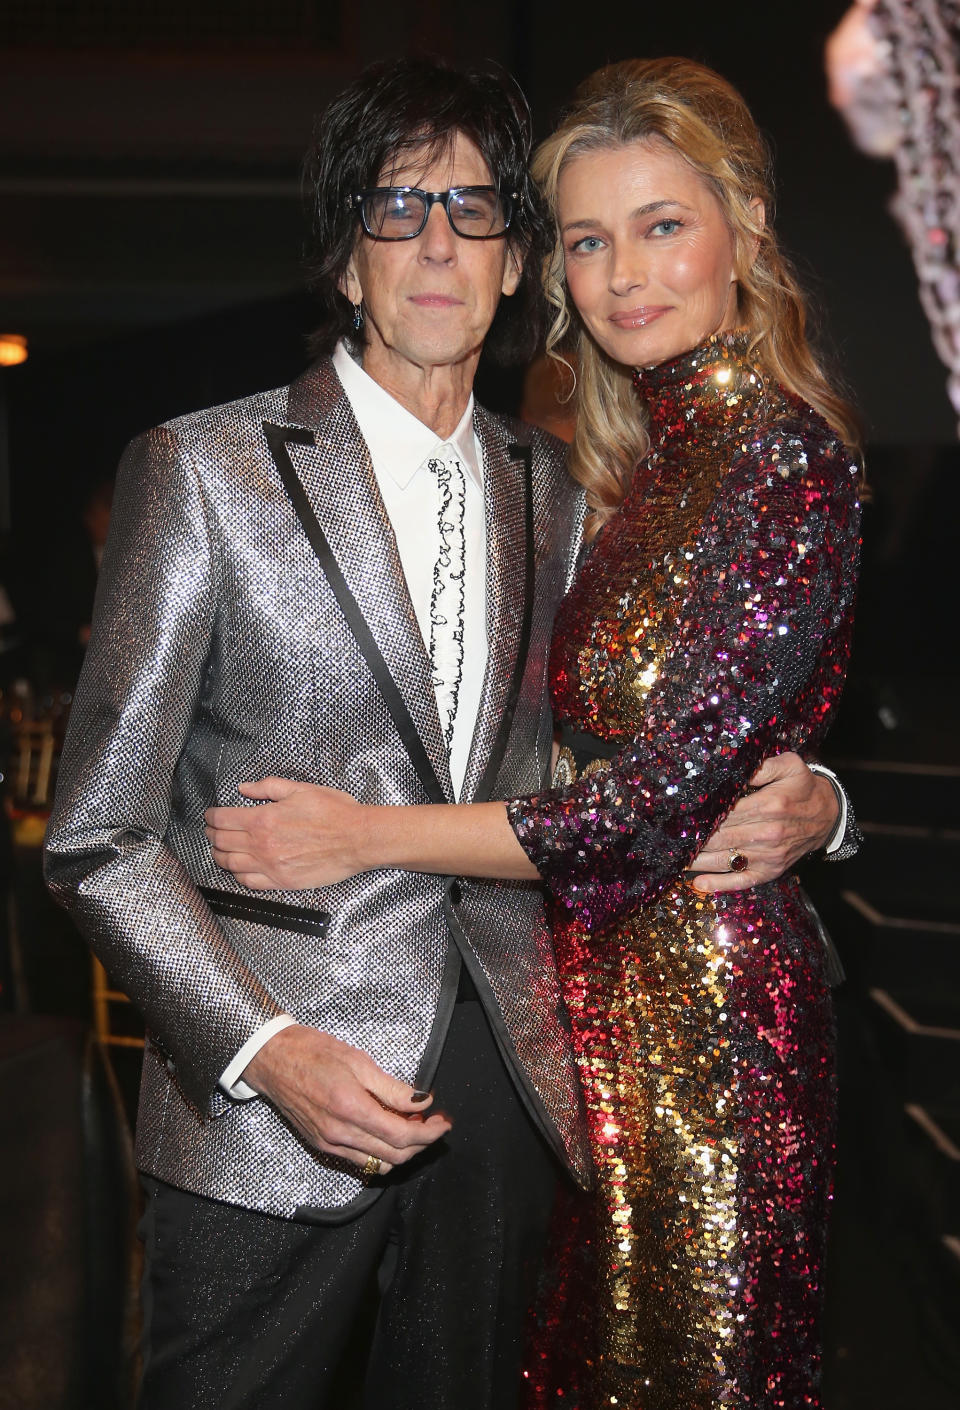 CLEVELAND, OH - APRIL 14:  Inductee Ric Ocasek of The Cars and Paulina Porizkova attend 33rd Annual Rock & Roll Hall of Fame Induction Ceremony at Public Auditorium on April 14, 2018 in Cleveland, Ohio.  (Photo by Kevin Kane/Getty Images For The Rock and Roll Hall of Fame)